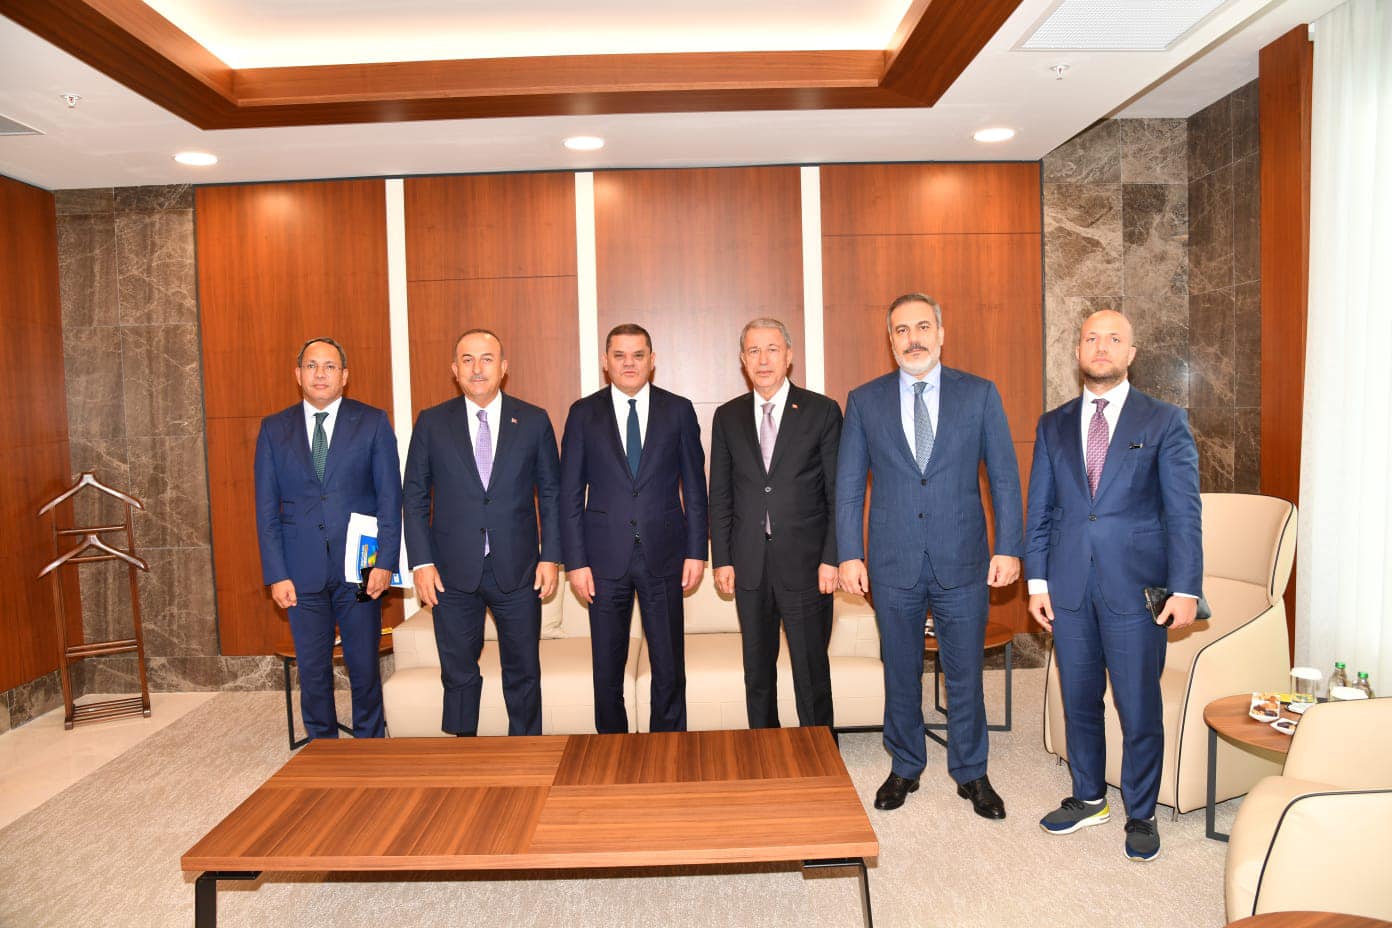 Al Dabaiba meets in Istanbul with Ministers of Defense, Foreign Affairs and Head of Turkish intelligence.